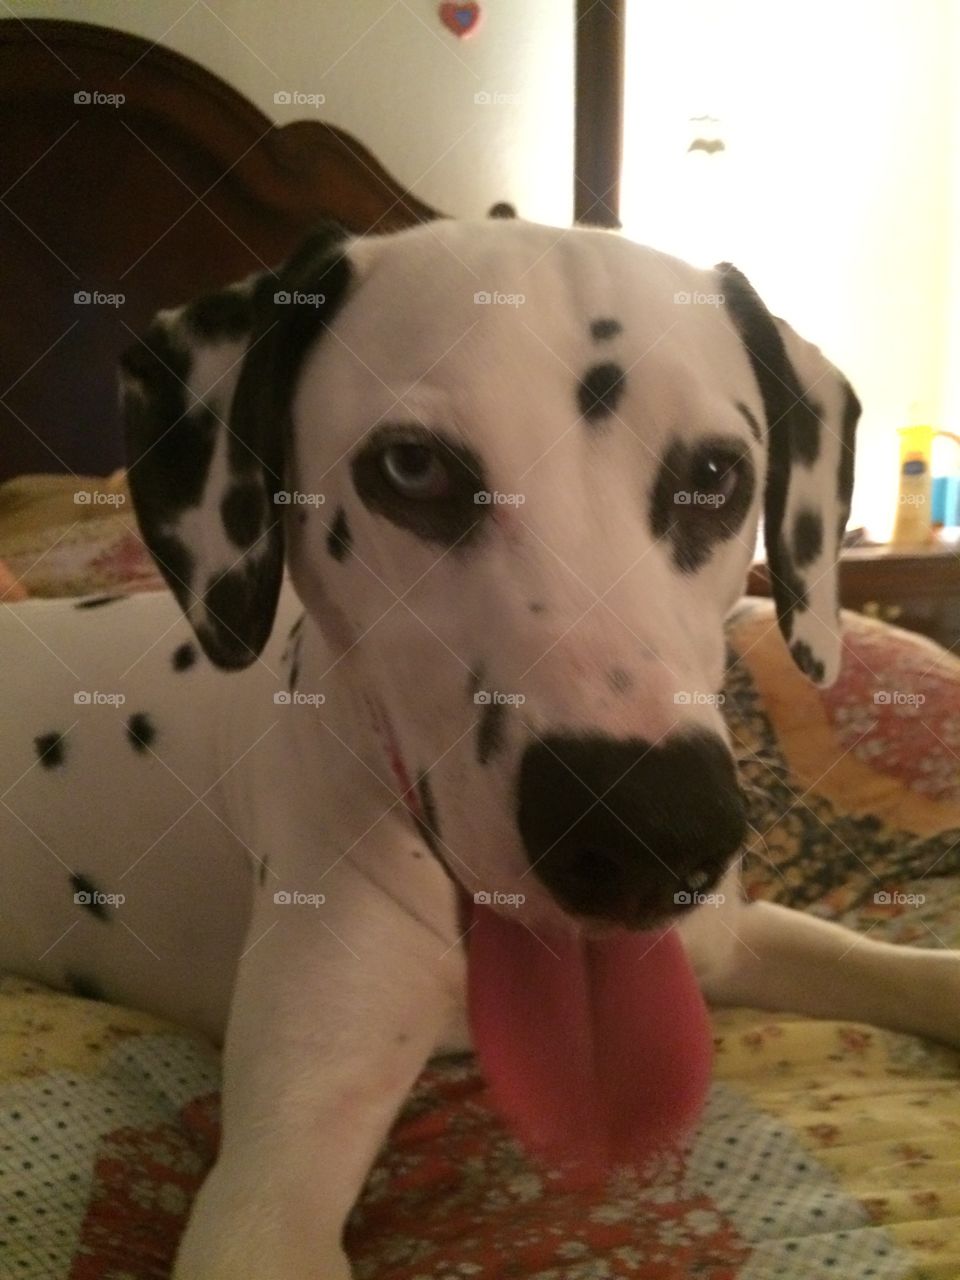 My Dalmatian Puppy Domino❤️. This is My 9Month Old Dalmatian Puppy Domino😘 He's chewed up a lot of my things around our HOME😢 But he stole My❤️so?
